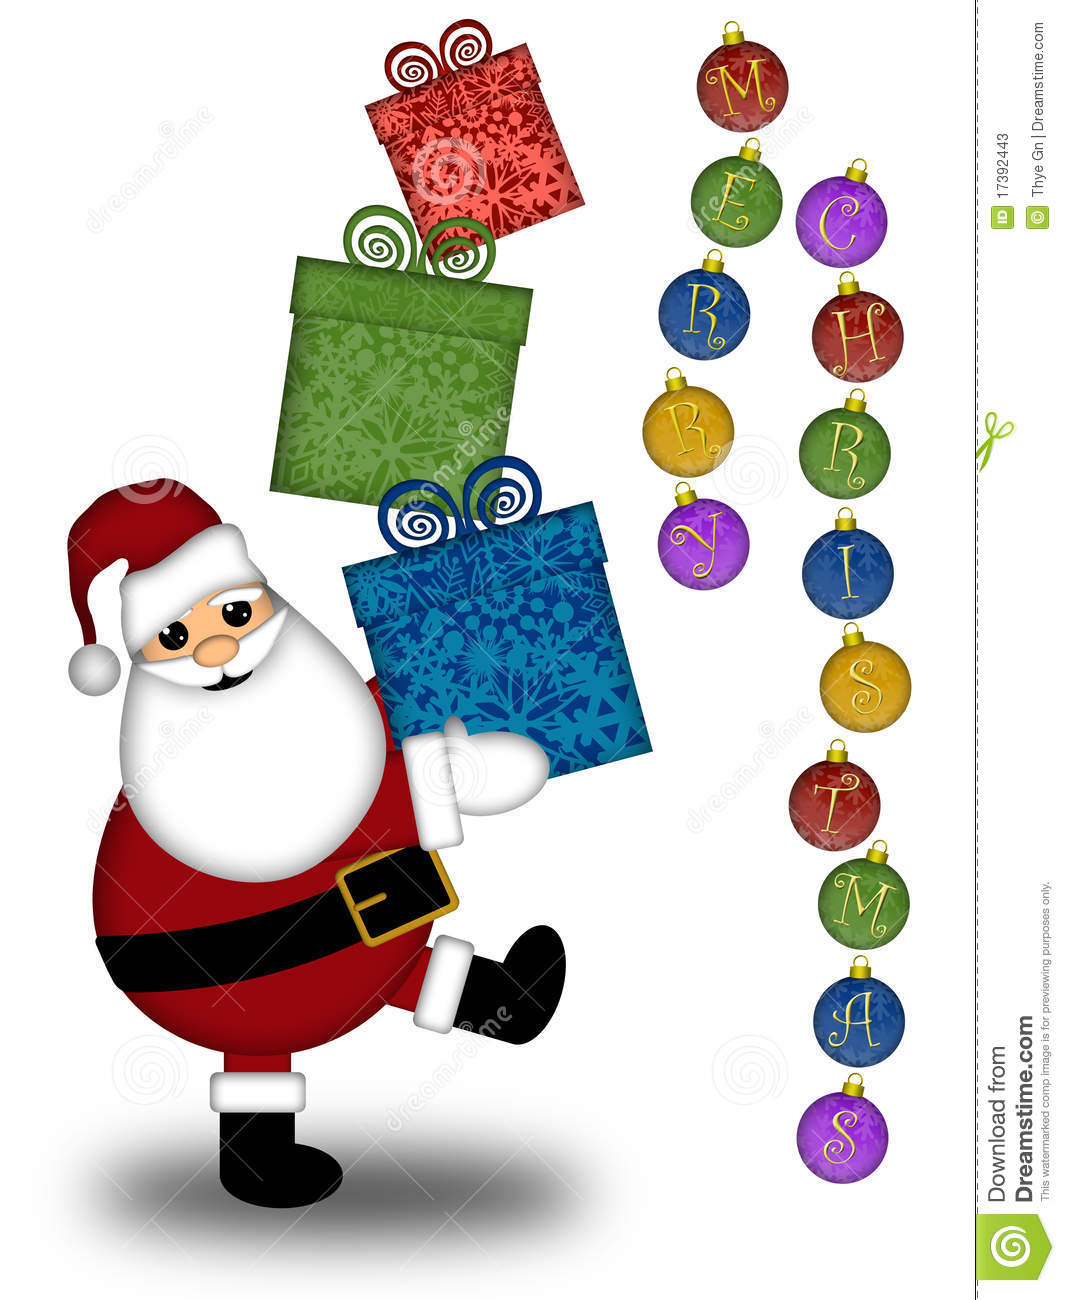 Santa Claus Carrying Stack Of Presents Illustration With Merry